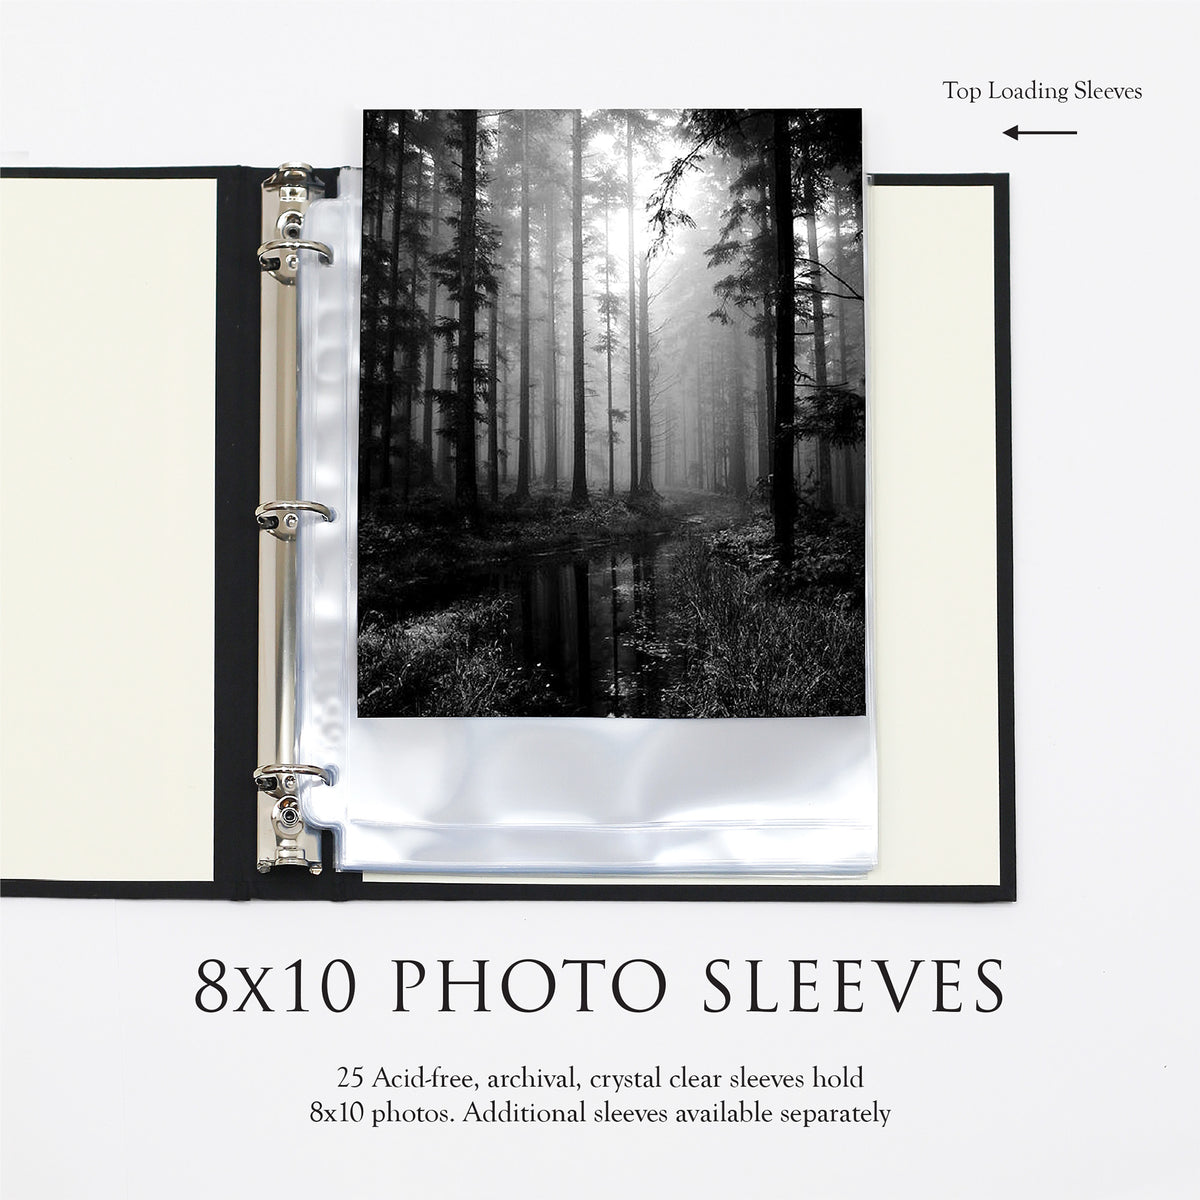 Large Photo Binder For 8x10 Photos | Cover: Celery Cotton | Available Personalized